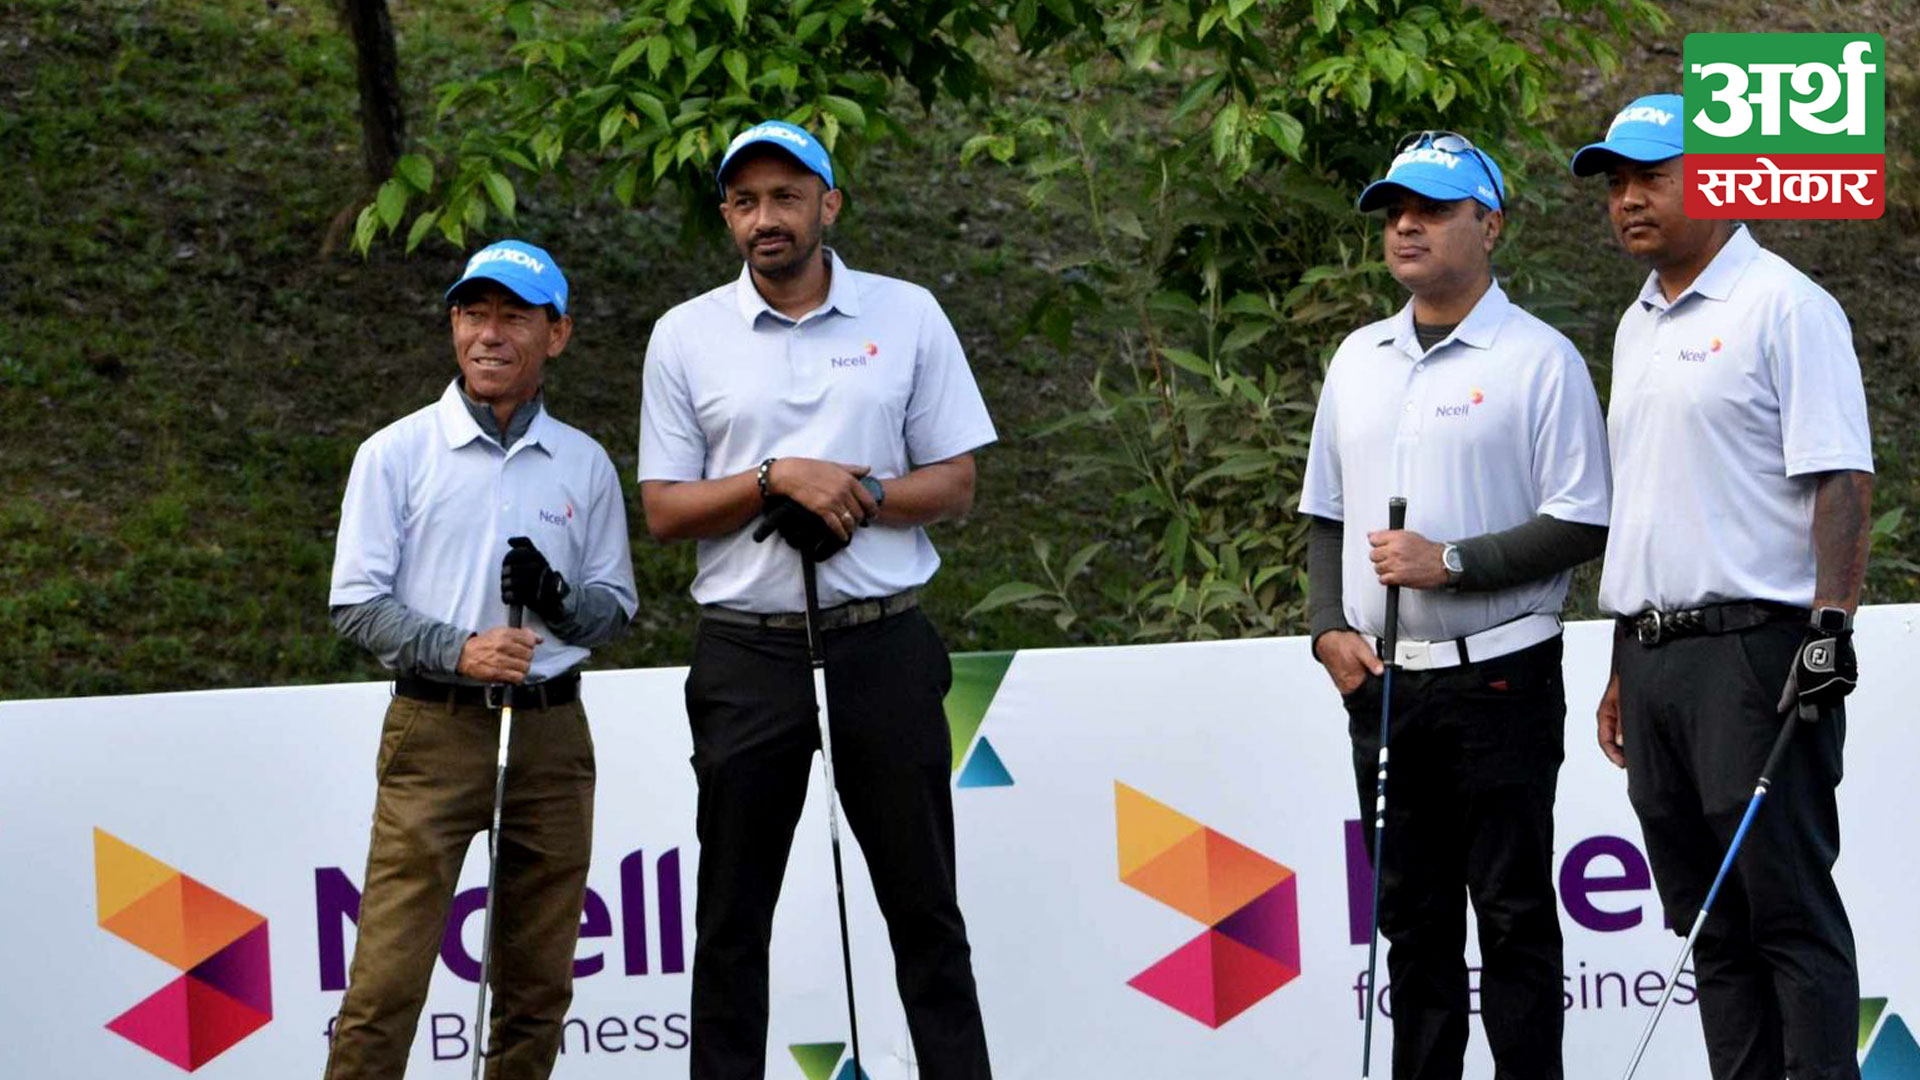 Ncell secures 3rd runner-up at the RNGC Scramble Golf Tournament